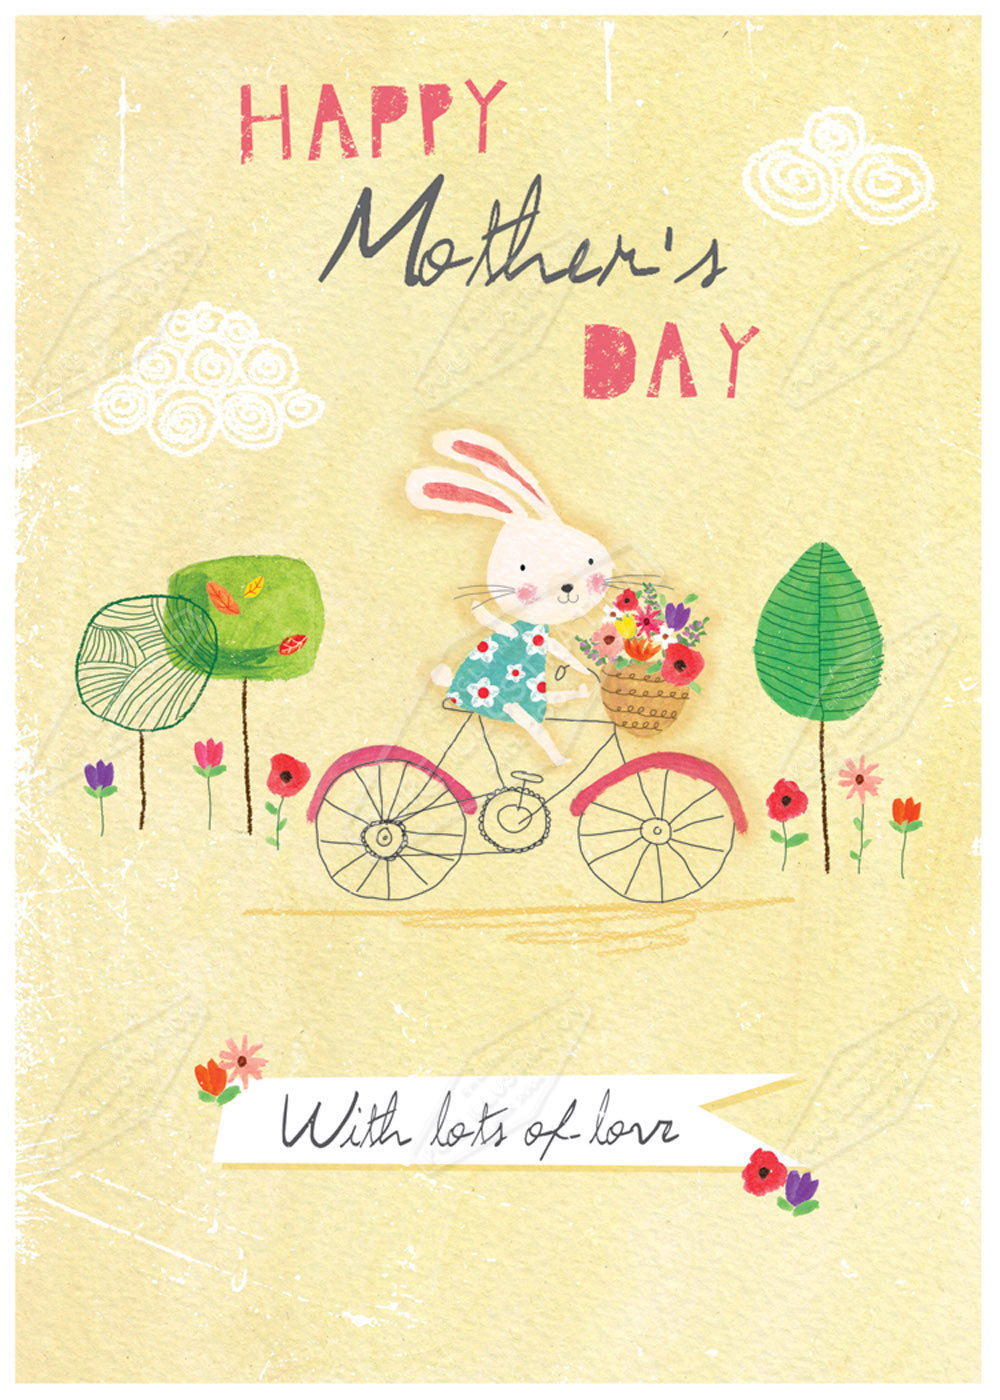 Cute Mother's Day Greeting Card Design by Cory Reid for Pure Art Licensing Agency International